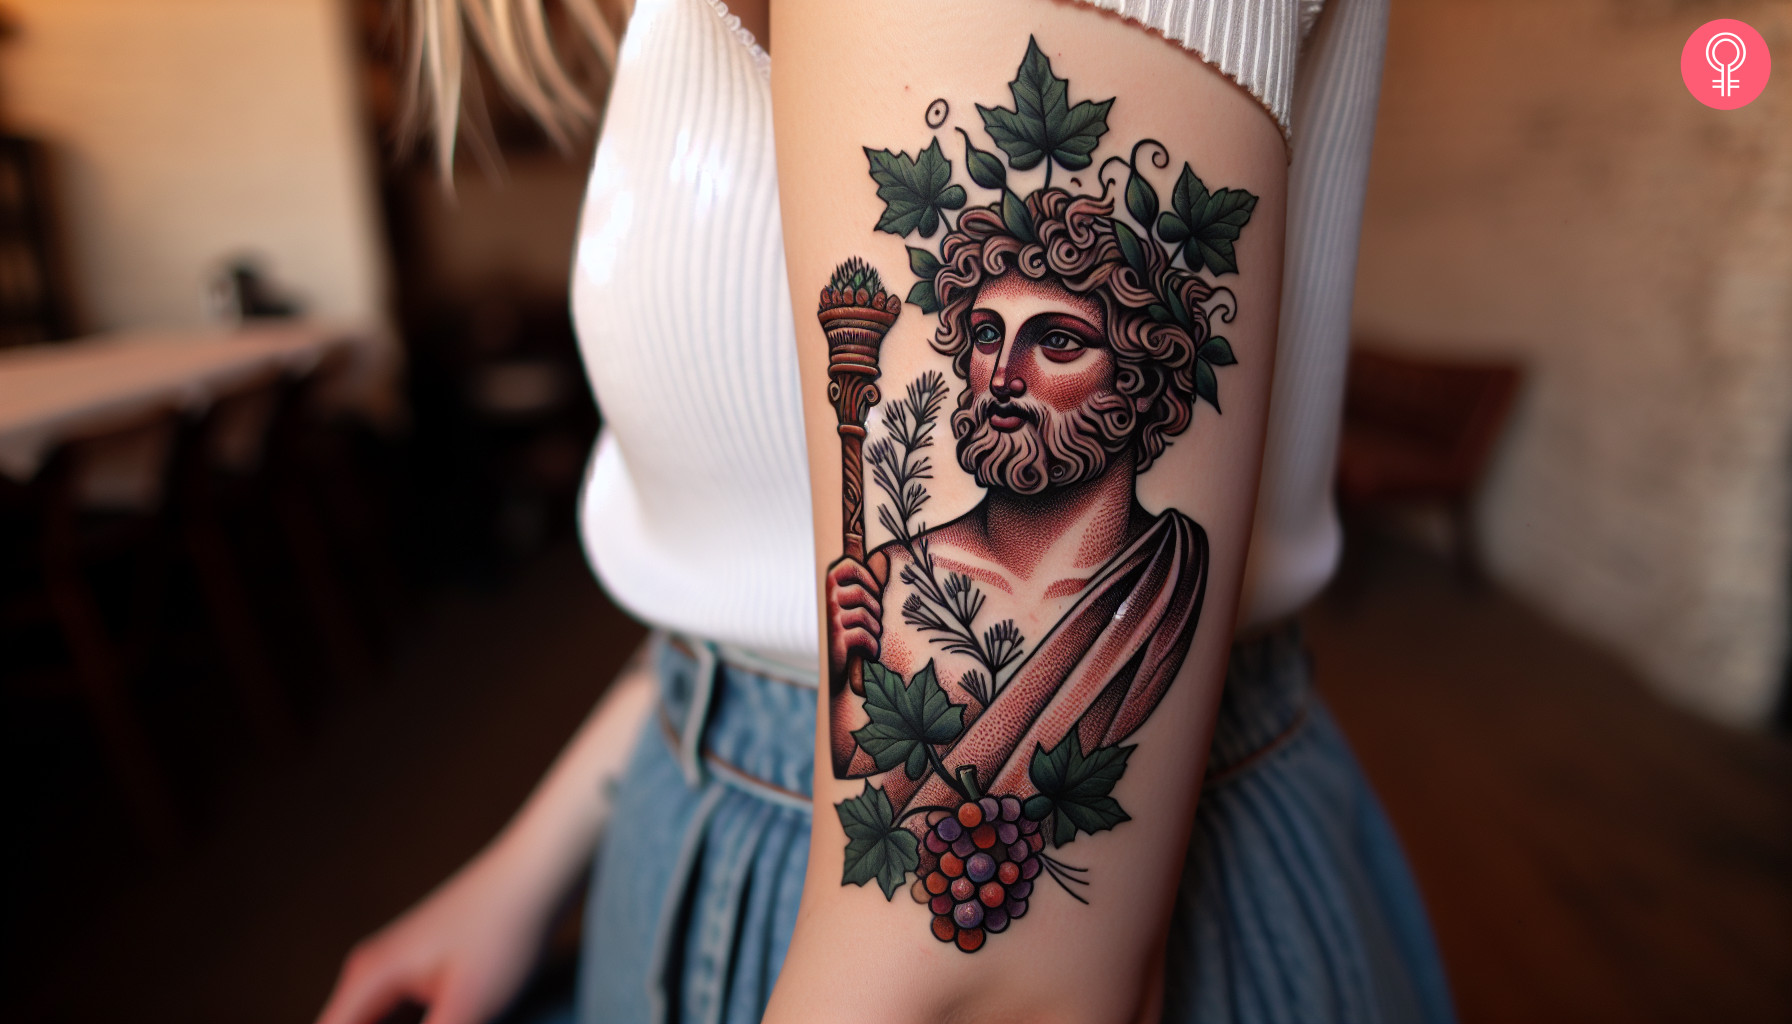 A side portrait of Achilles on the forearm